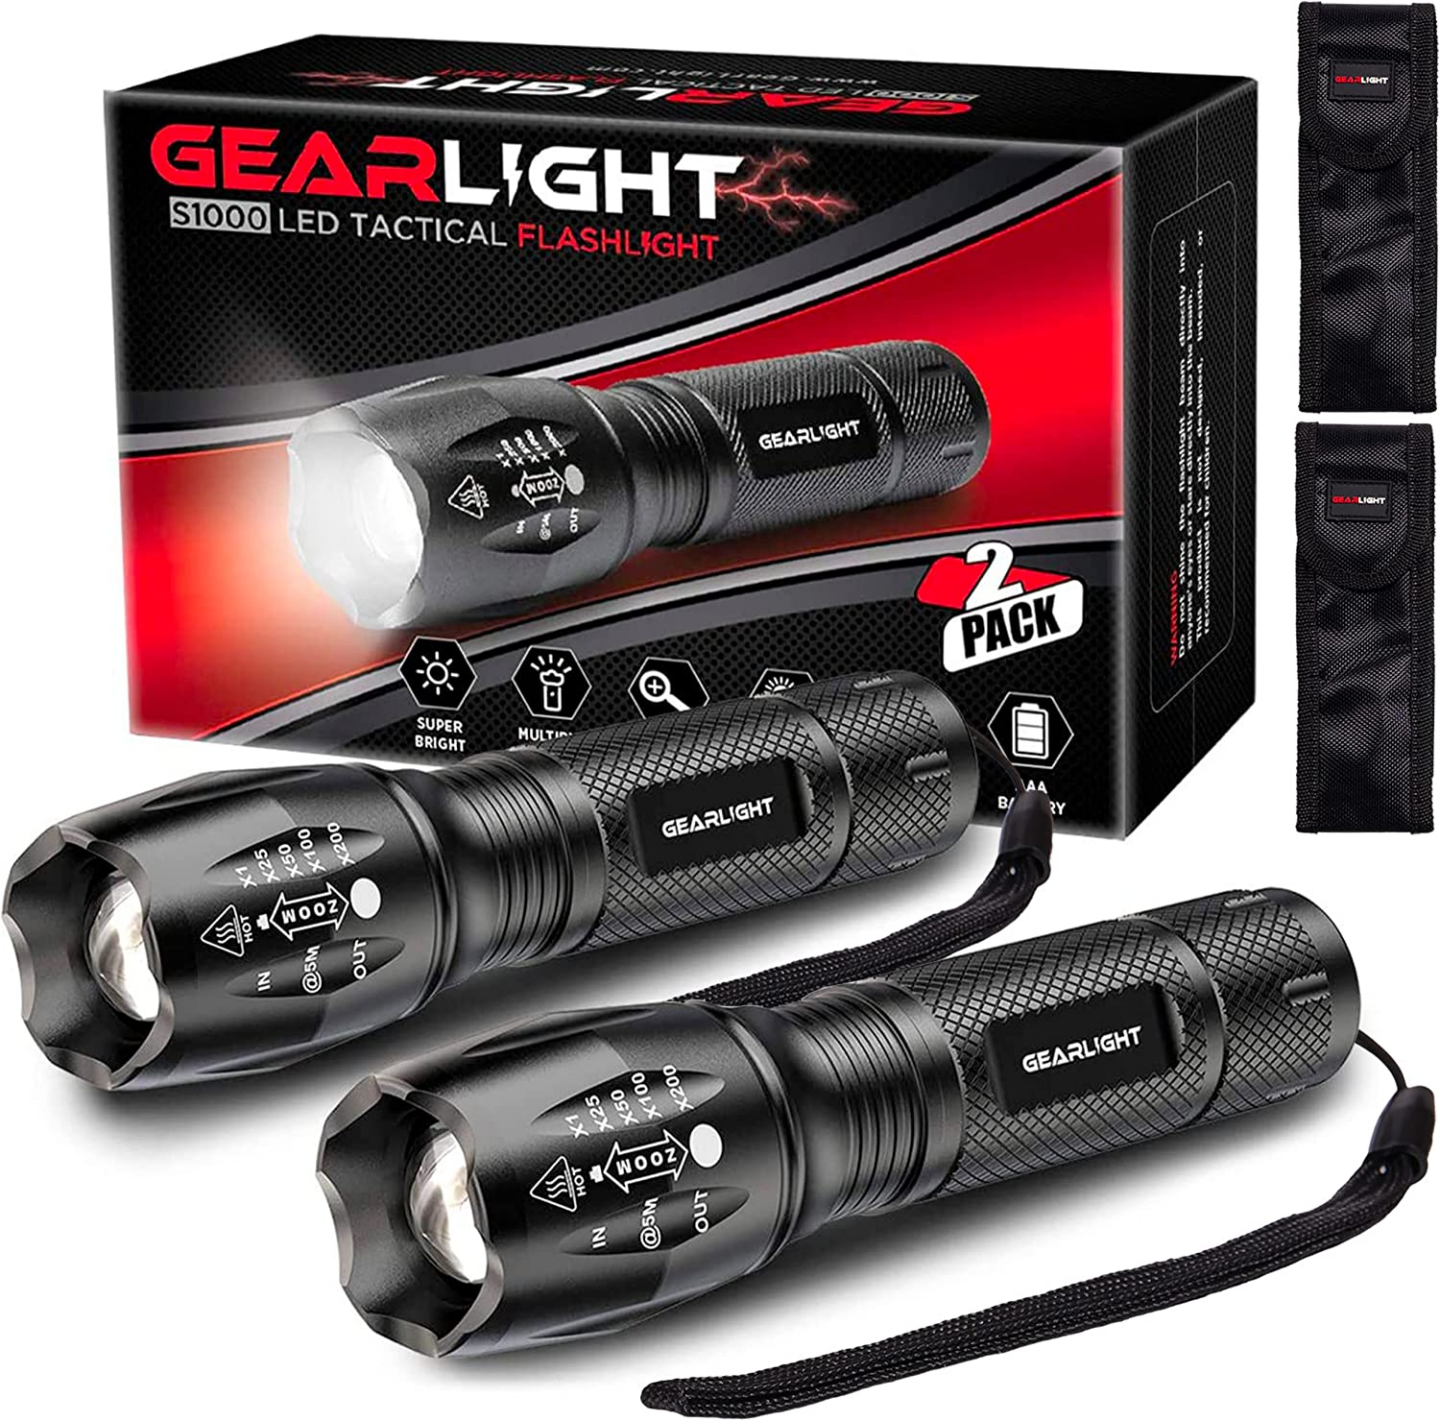 Gearlight S1000 LED Tactical Flashlight 2 pack